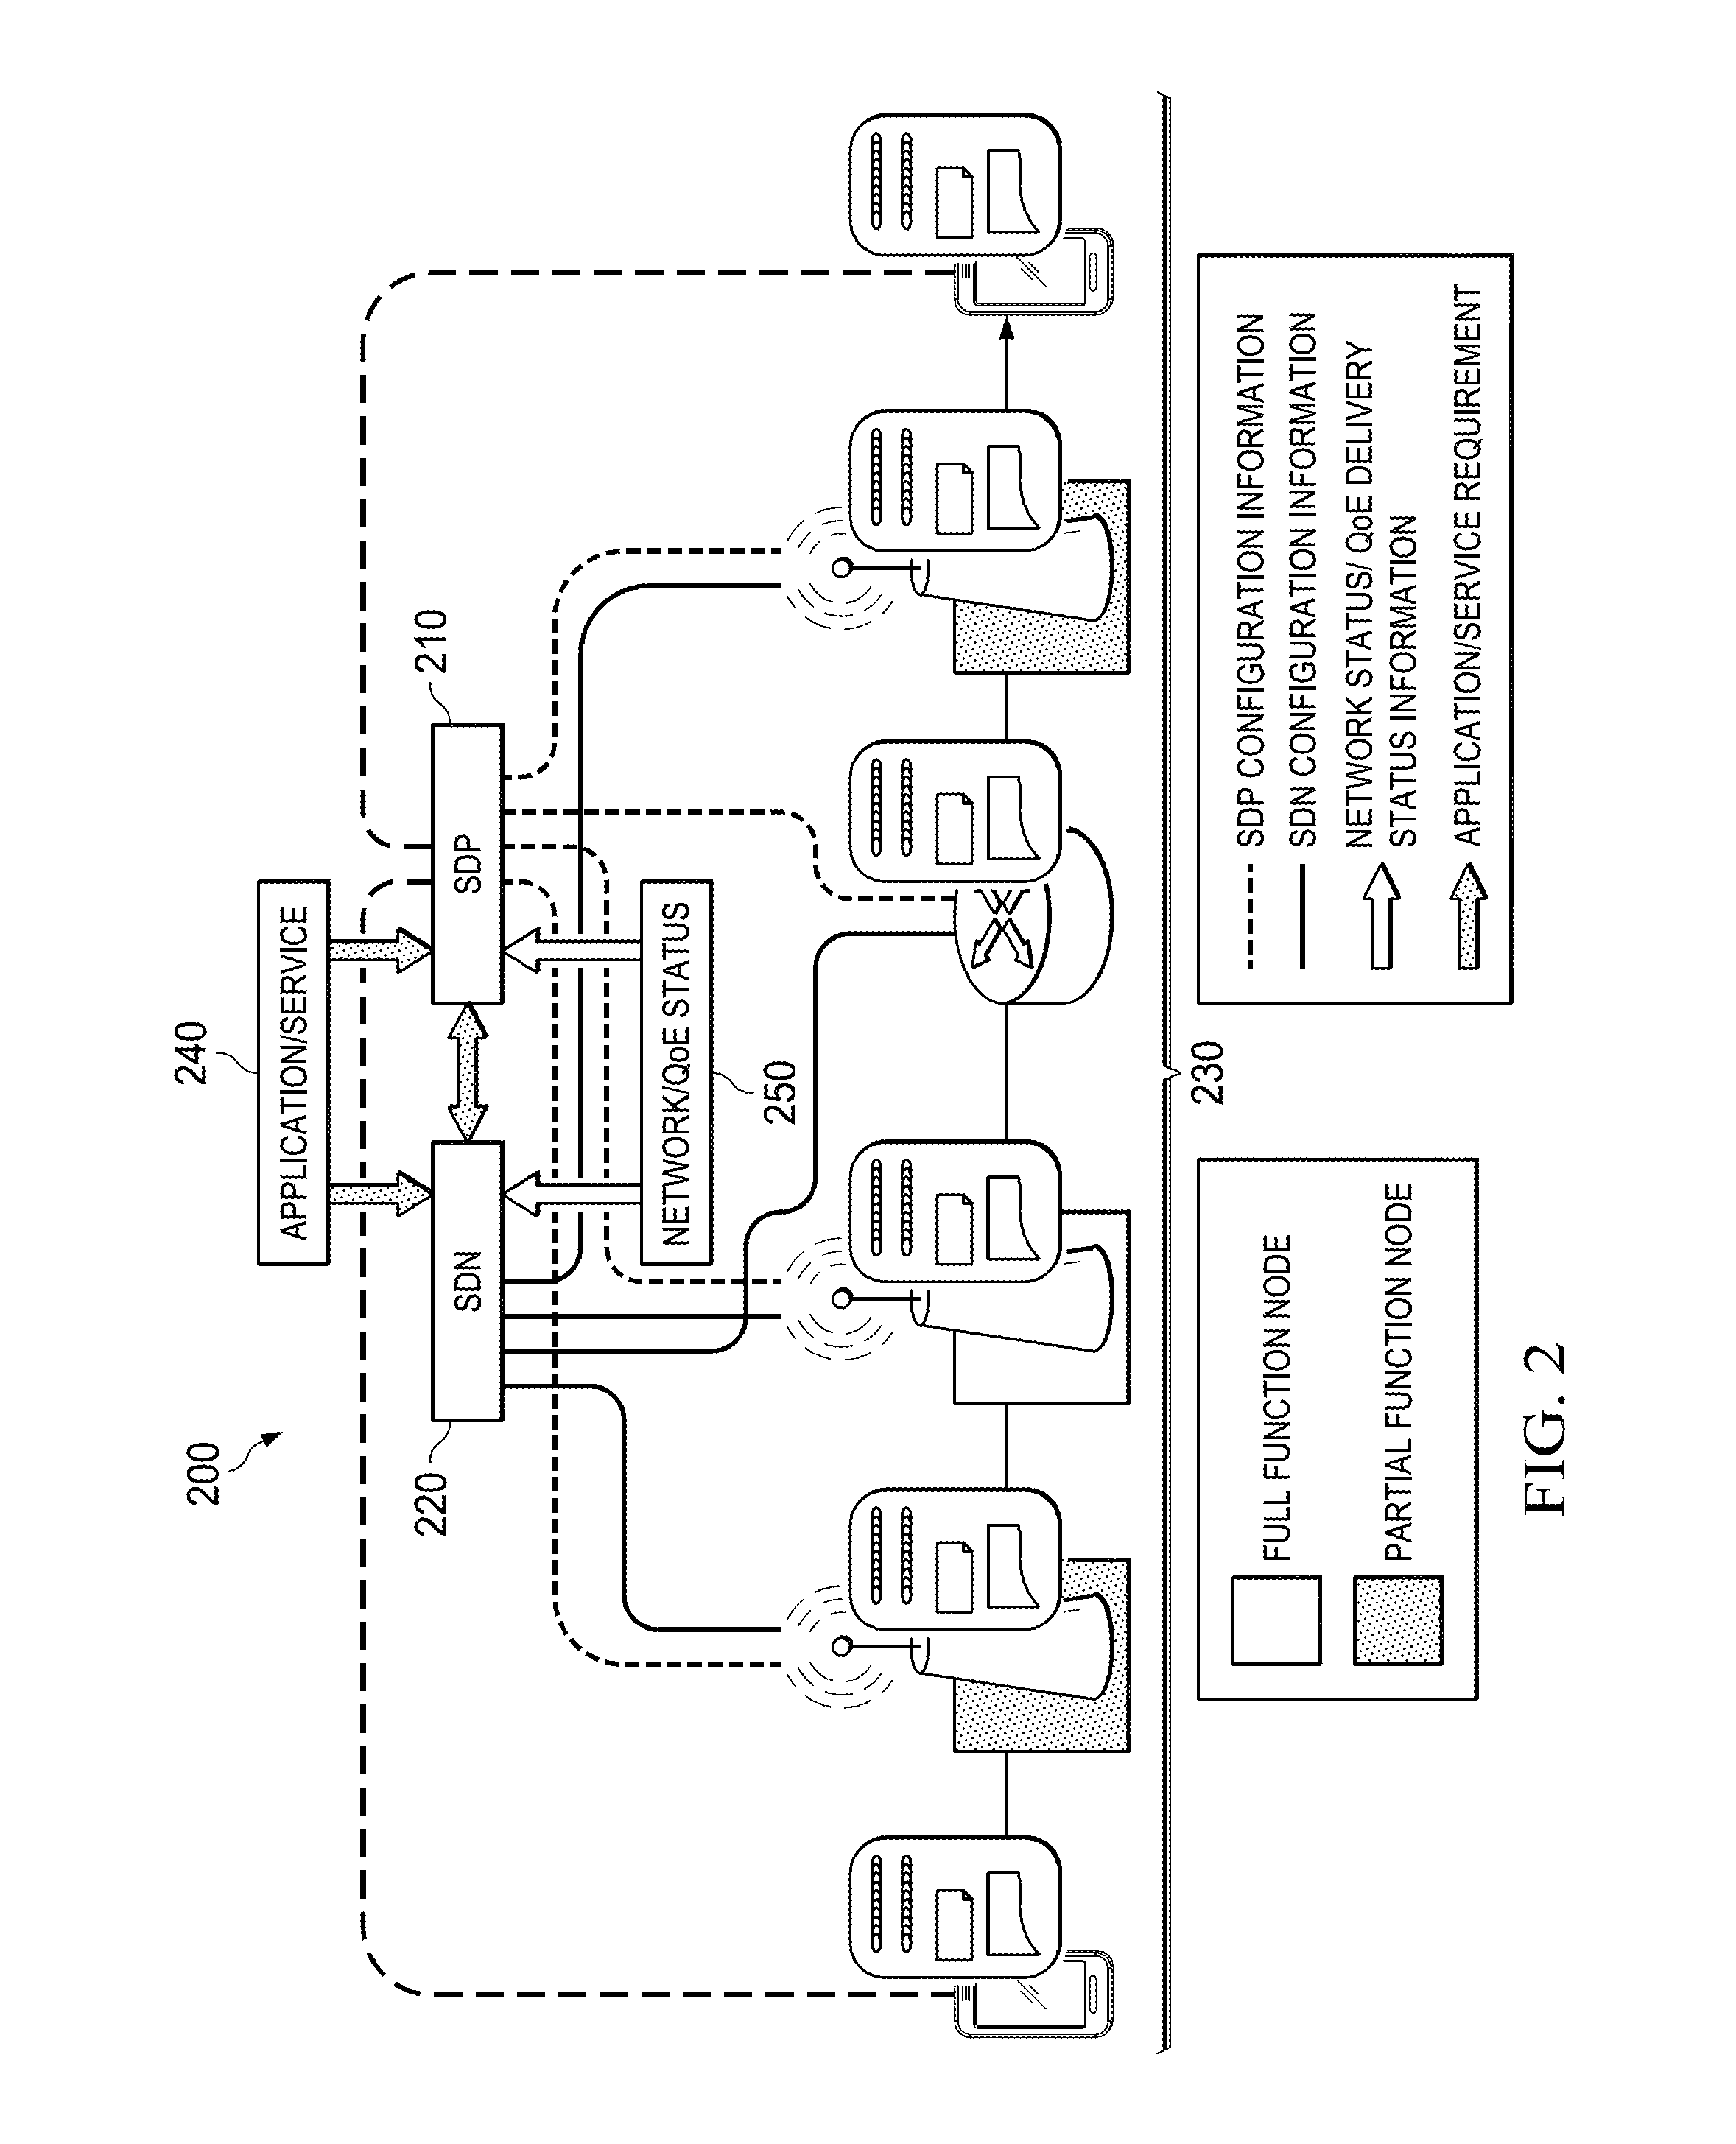 System and Method for Providing a Software Defined Protocol Stack